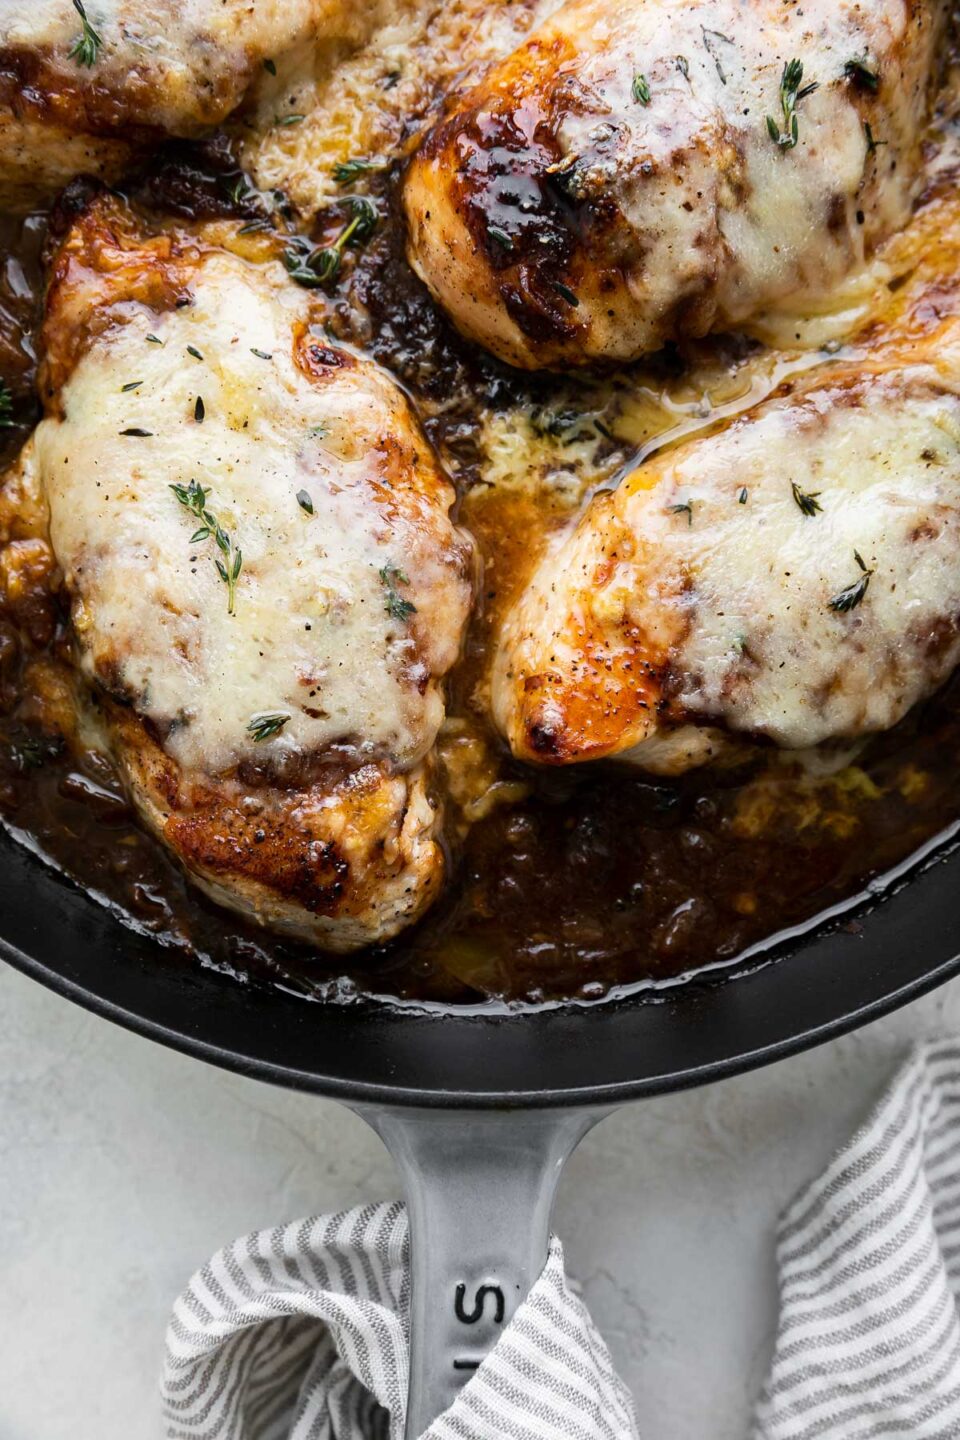 A close up of finished French onion chicken inside of a grey Staub cast iron skillet. The skillet sits atop a creamy white textured surface and has a grey and white striped linen napkin wrapped around the skillet handle.